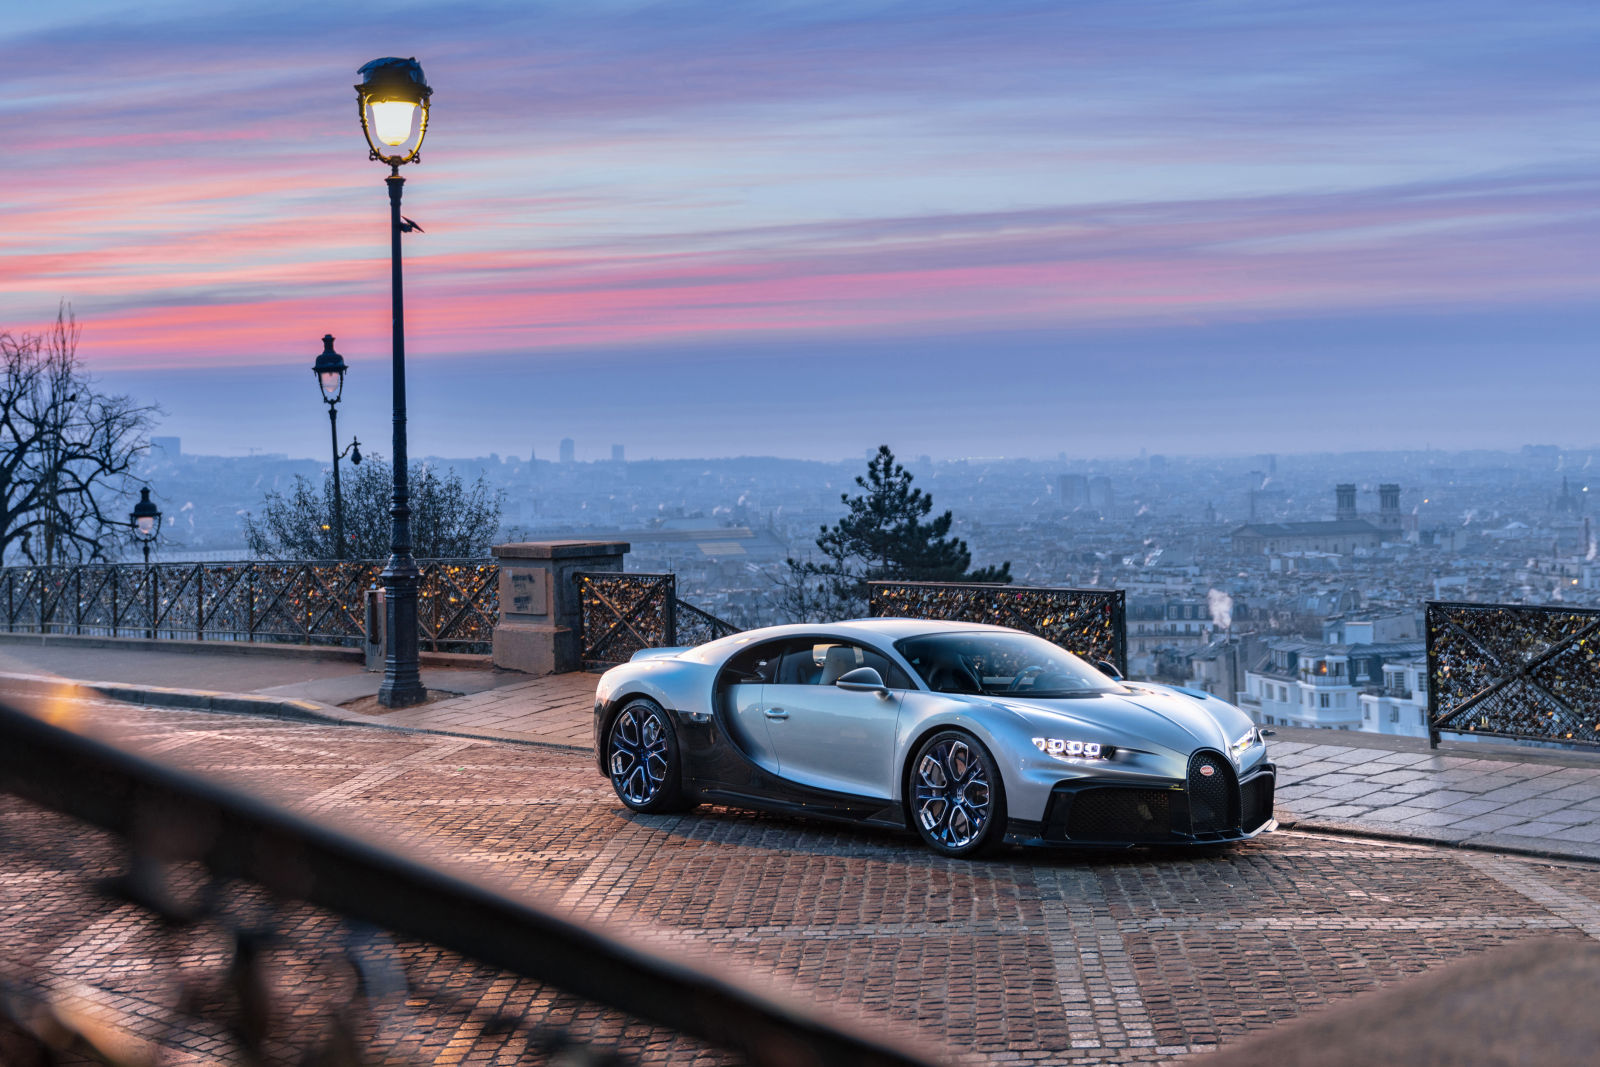 The Bugatti Chiron Profilée: The Most Valuable New Car Ever Sold